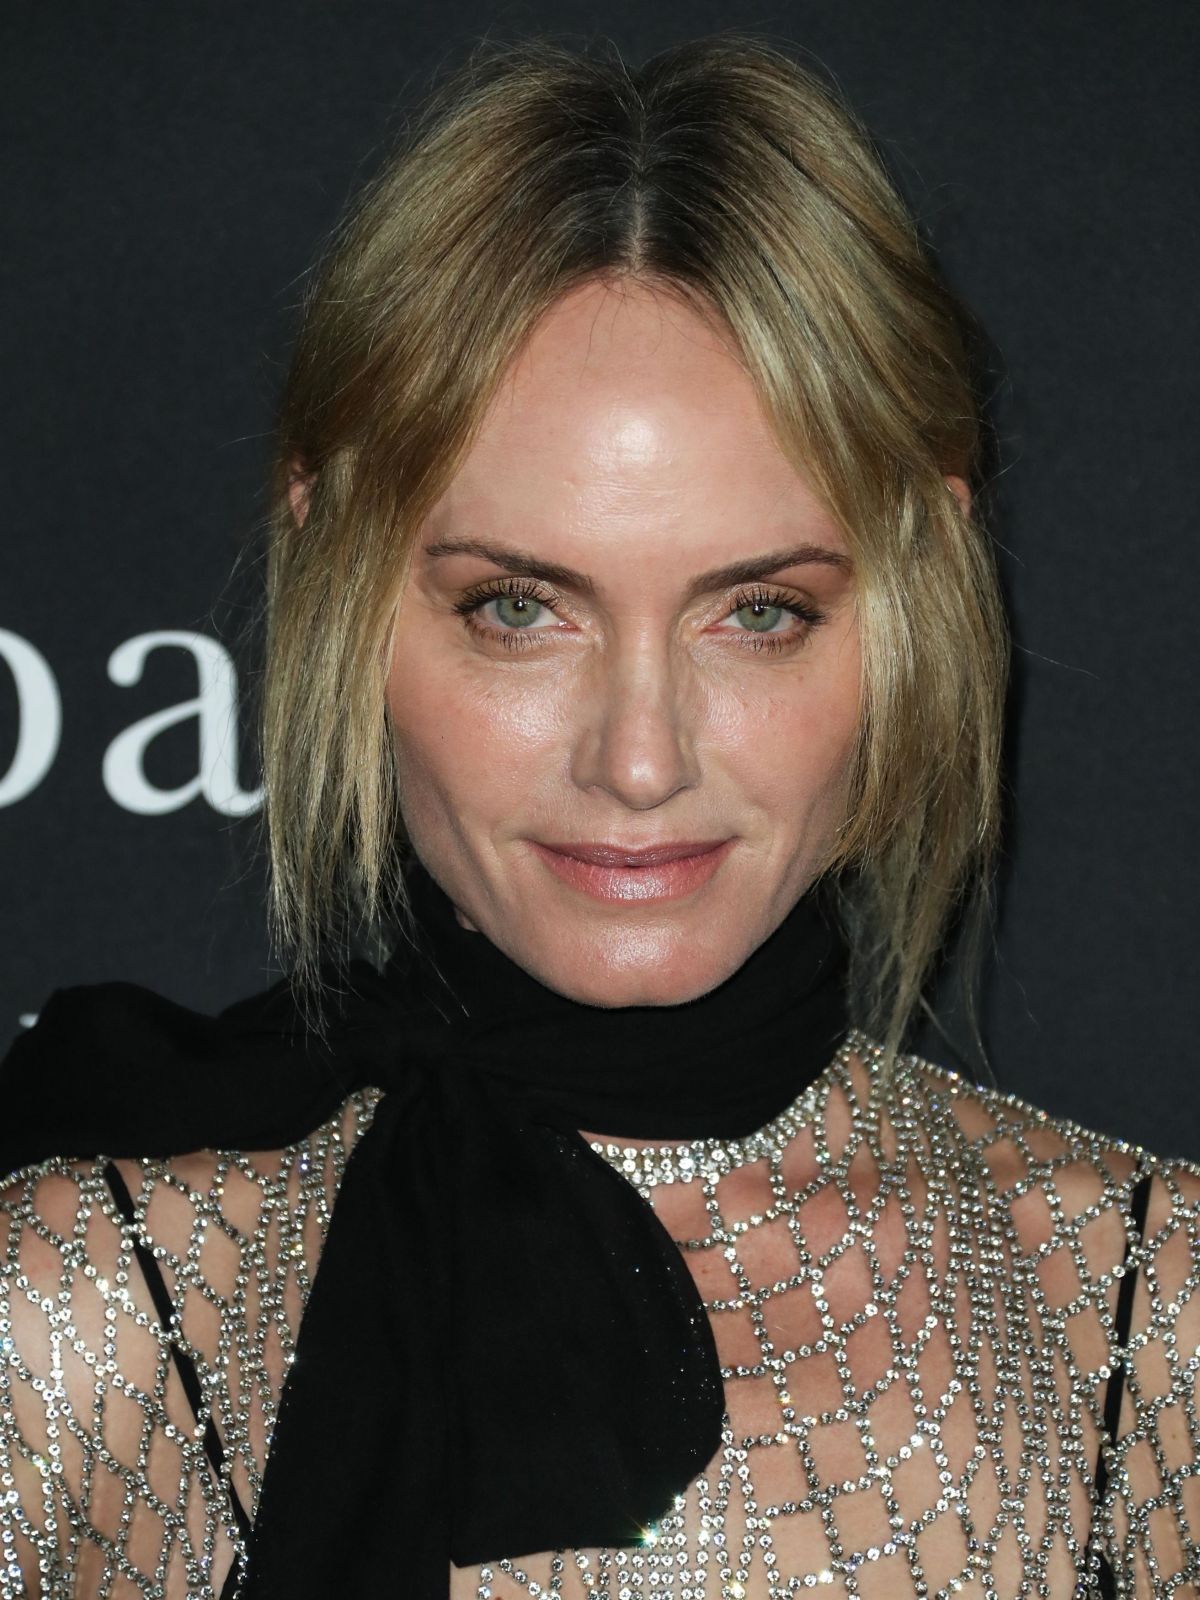 amber-valletta-at-instyle-awards-2018-in-los-angeles-10-22-2018-1.jpg